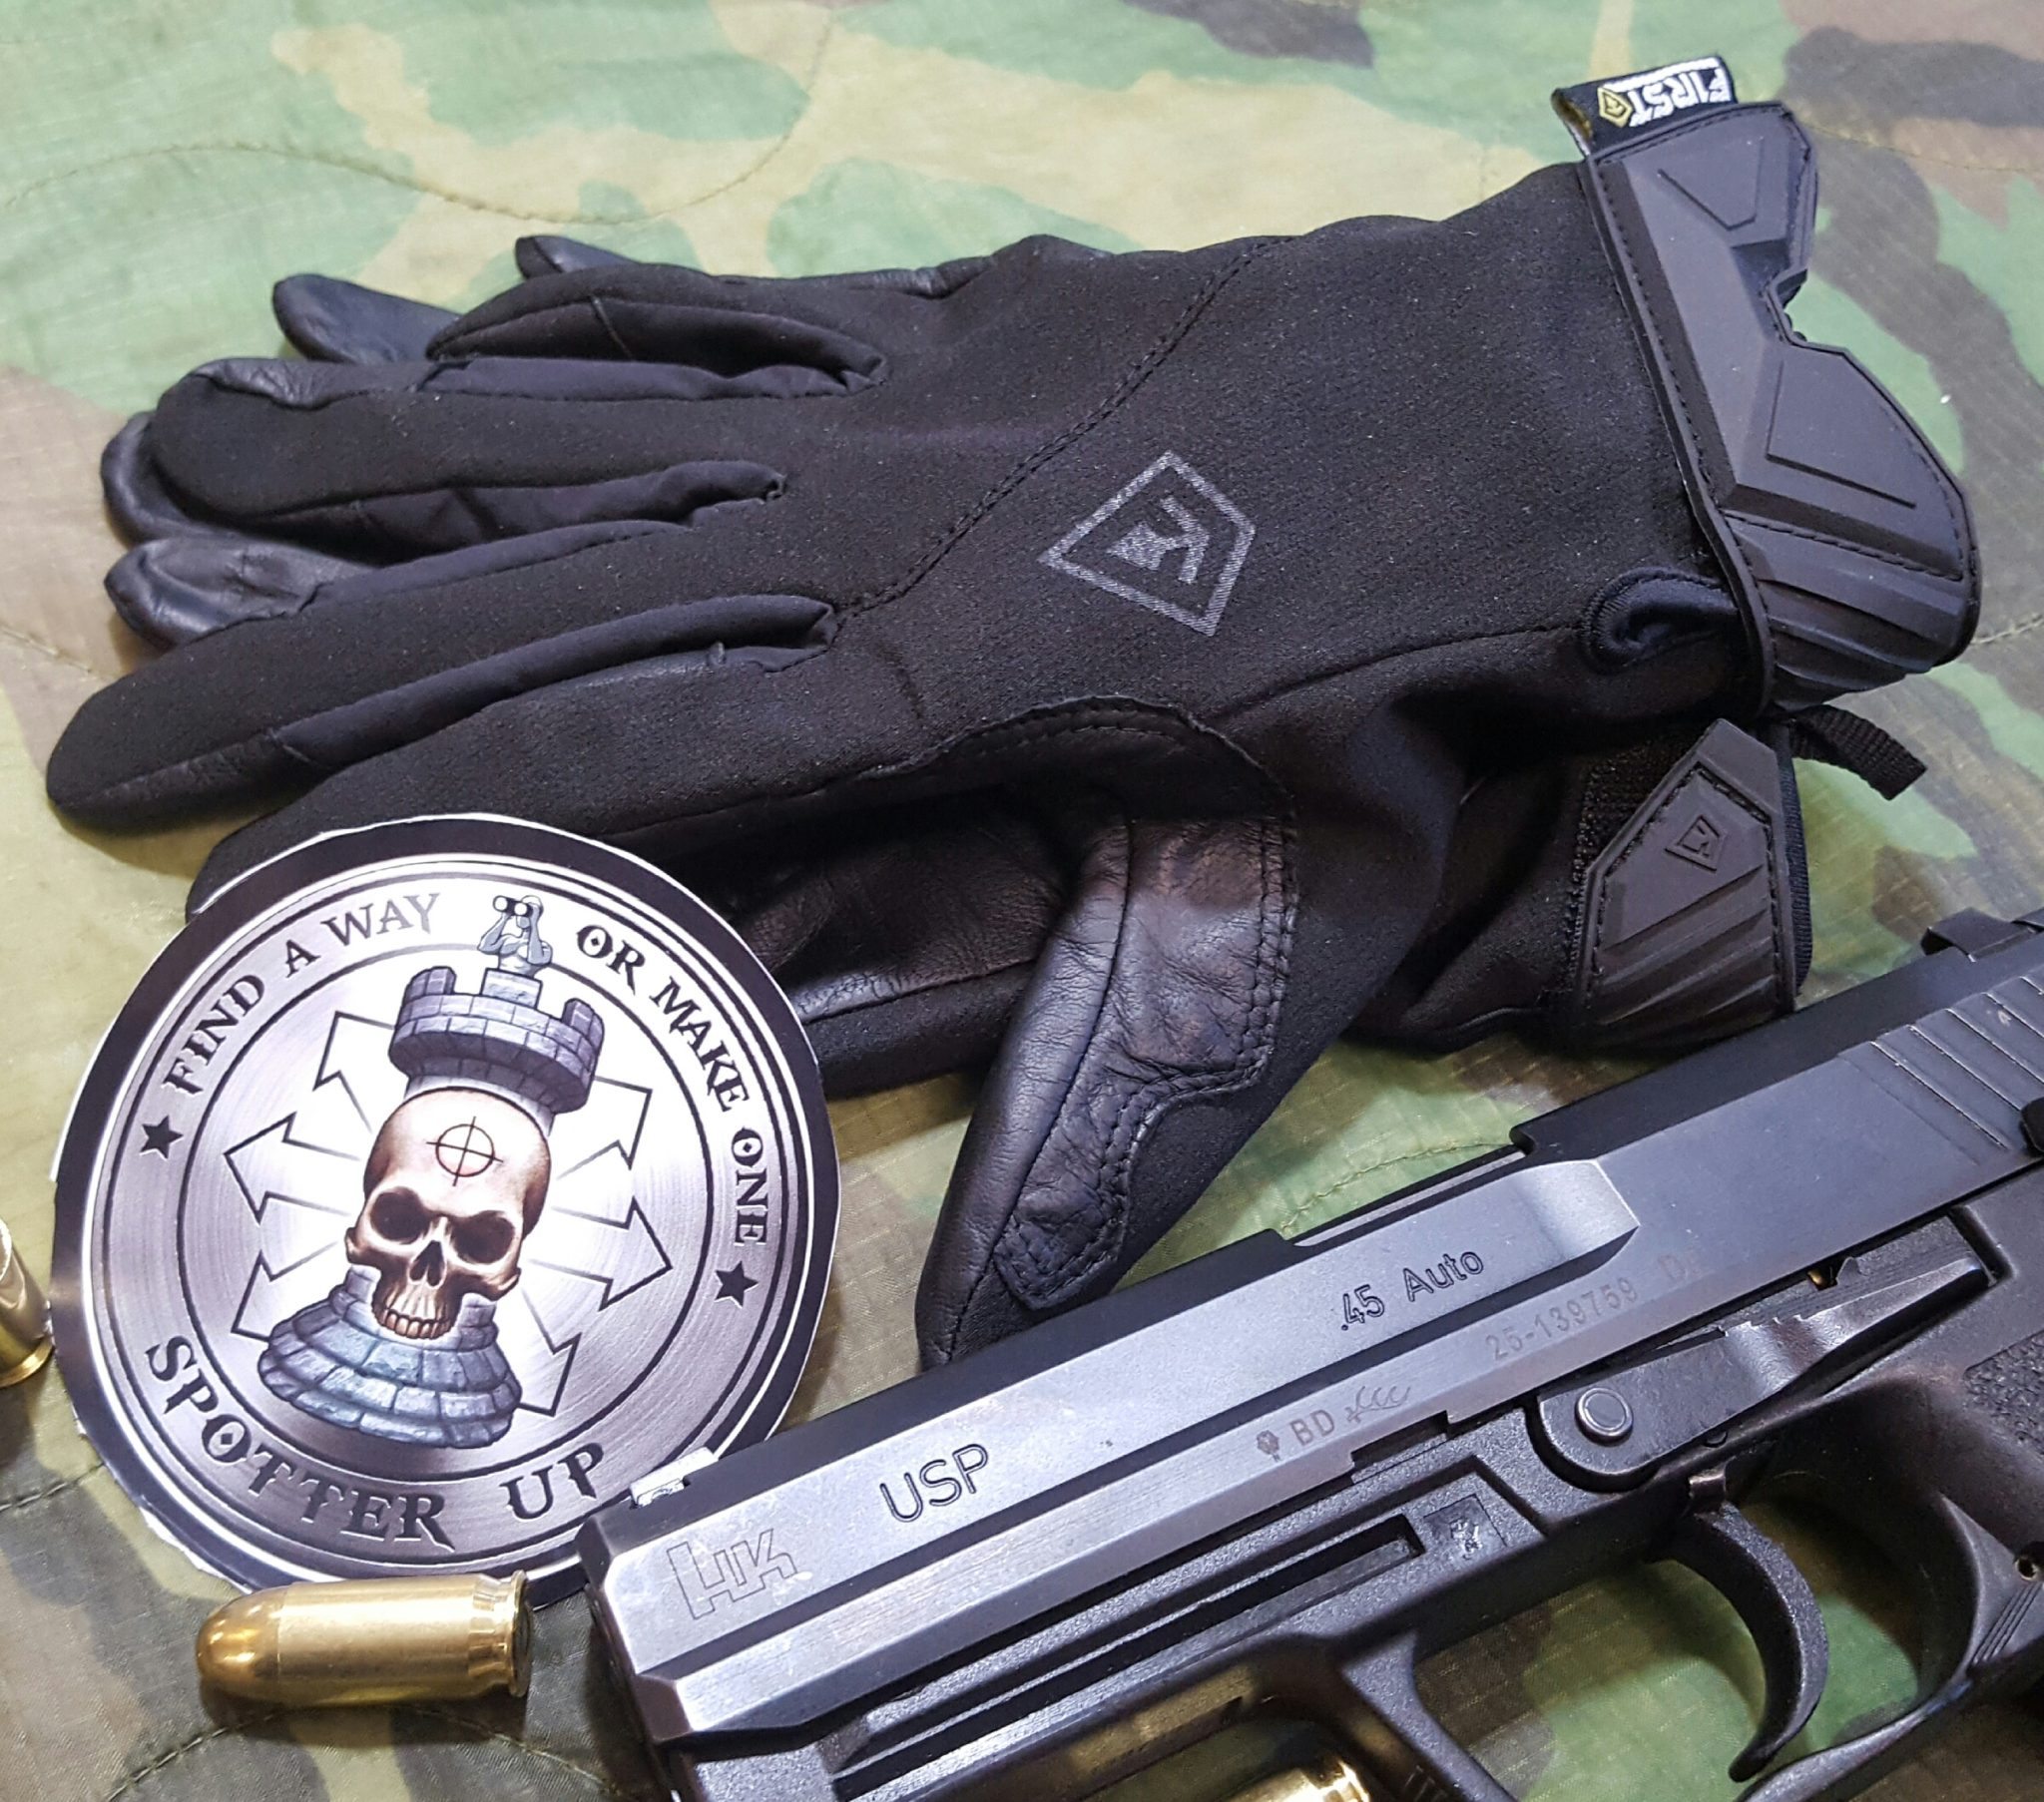 Duty Gloves Fit To You: First Tactical Medium Duty Gloves • Spotter Up